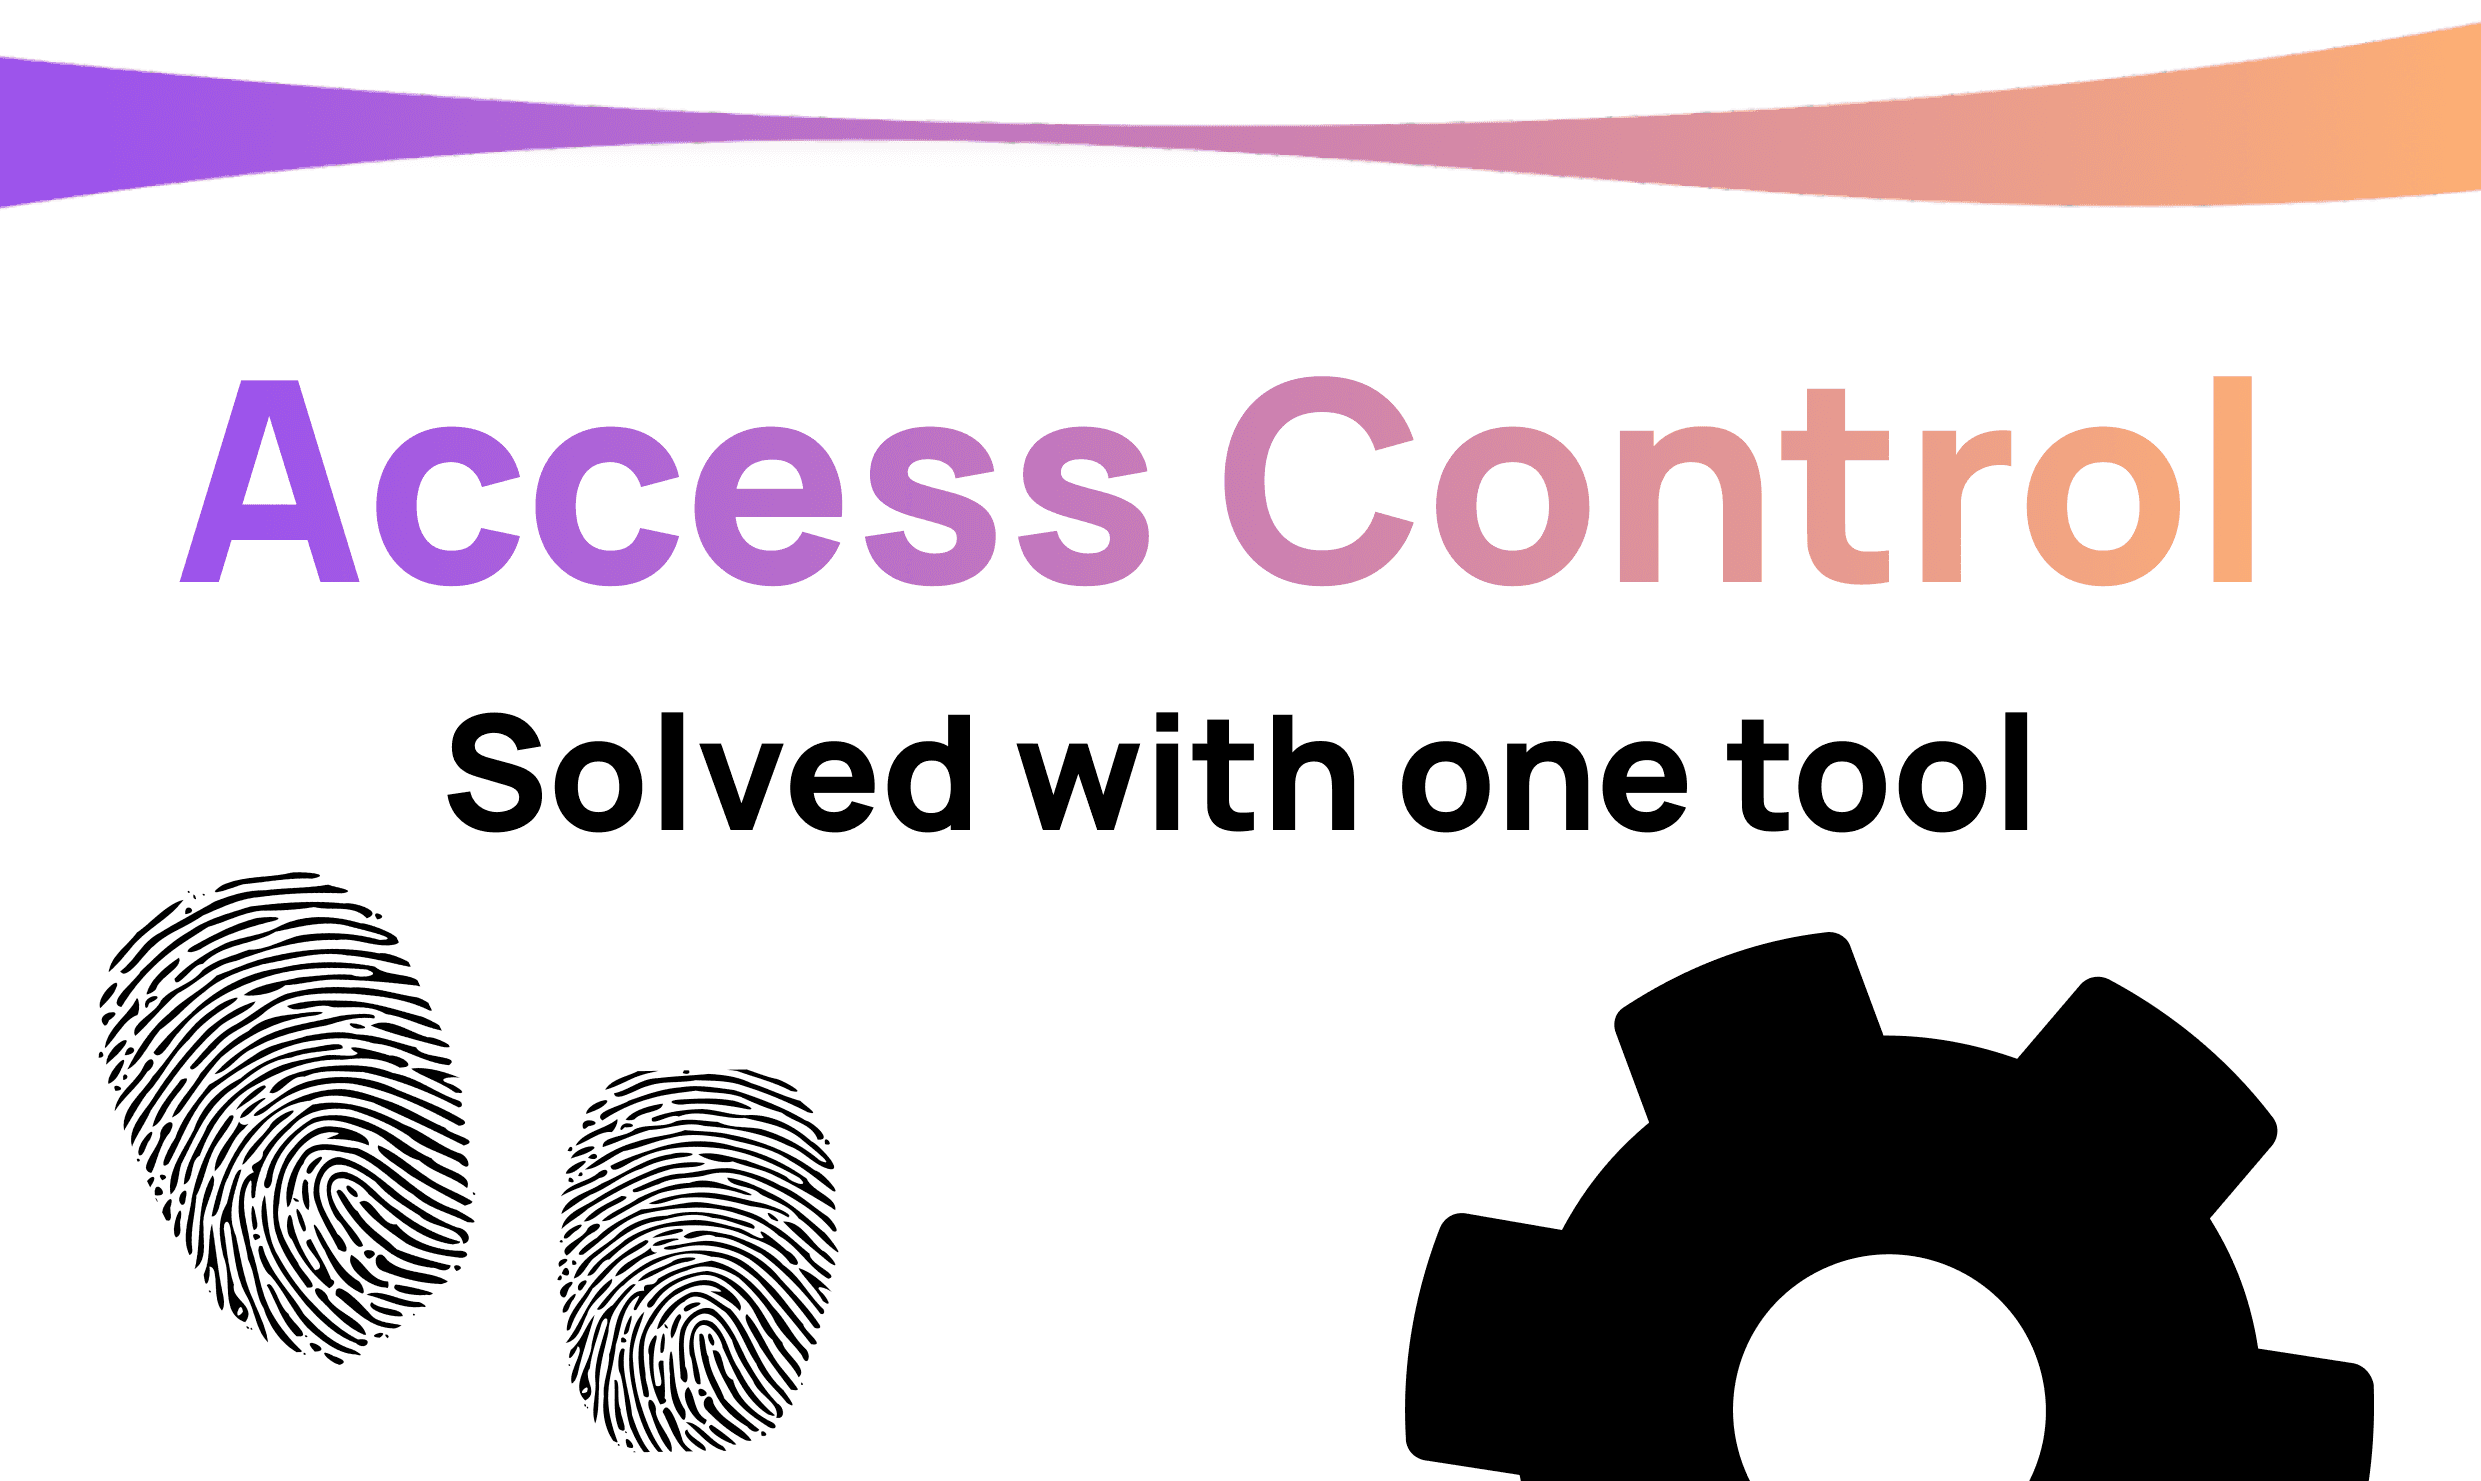 Access Control - from scary to simple with one open-source tool